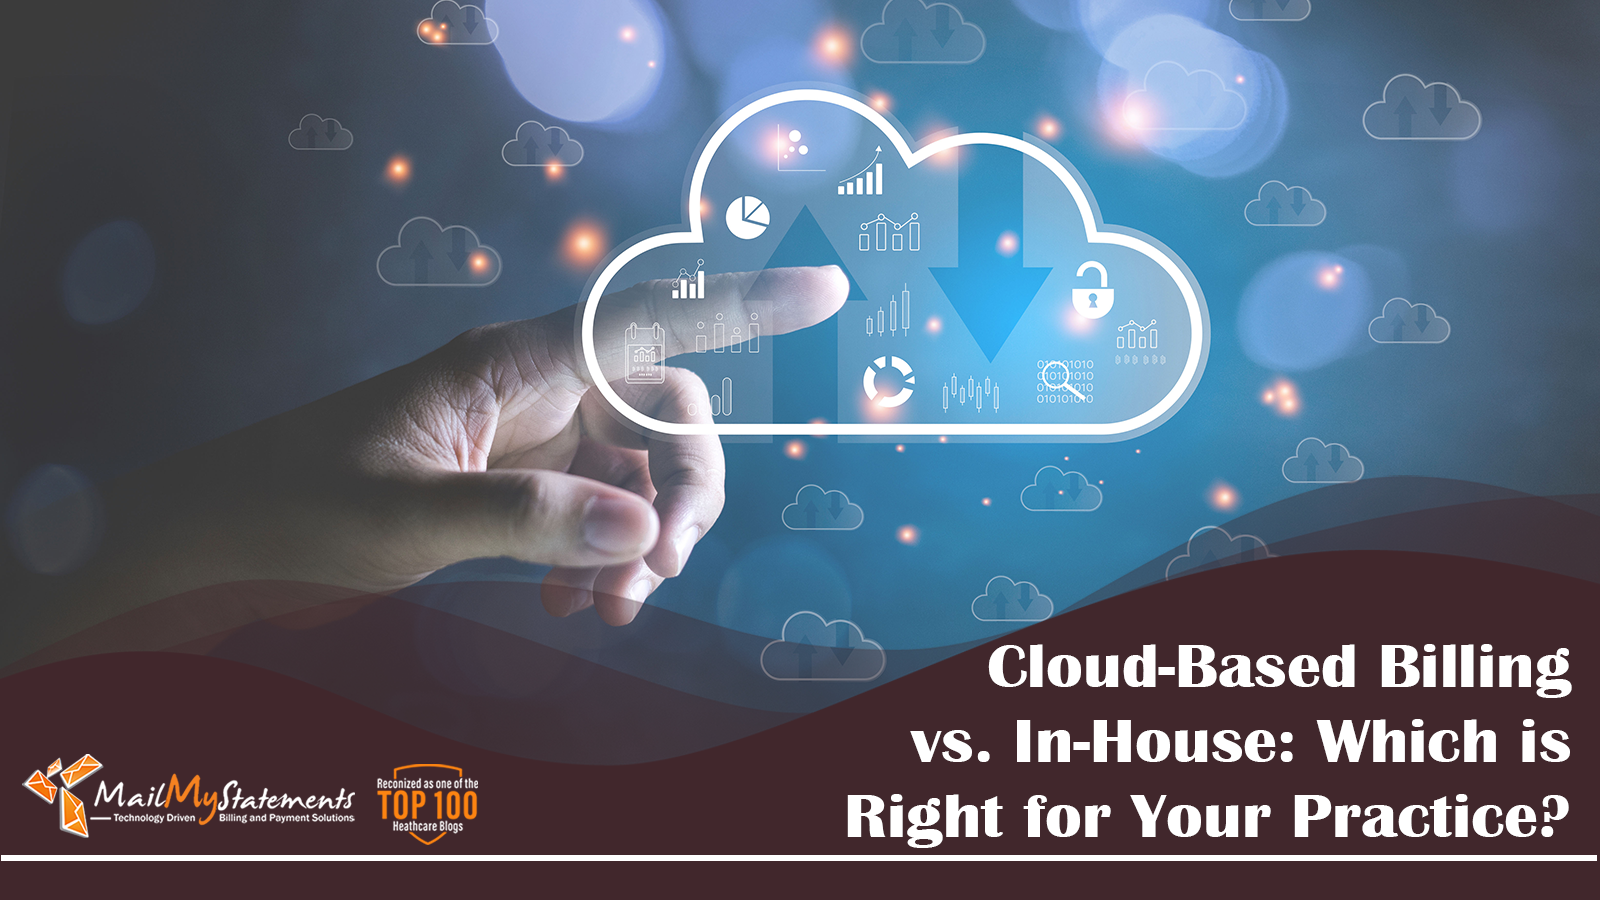 Cloud-Based Patient Billing vs. In-House Which is Right for Your Practice